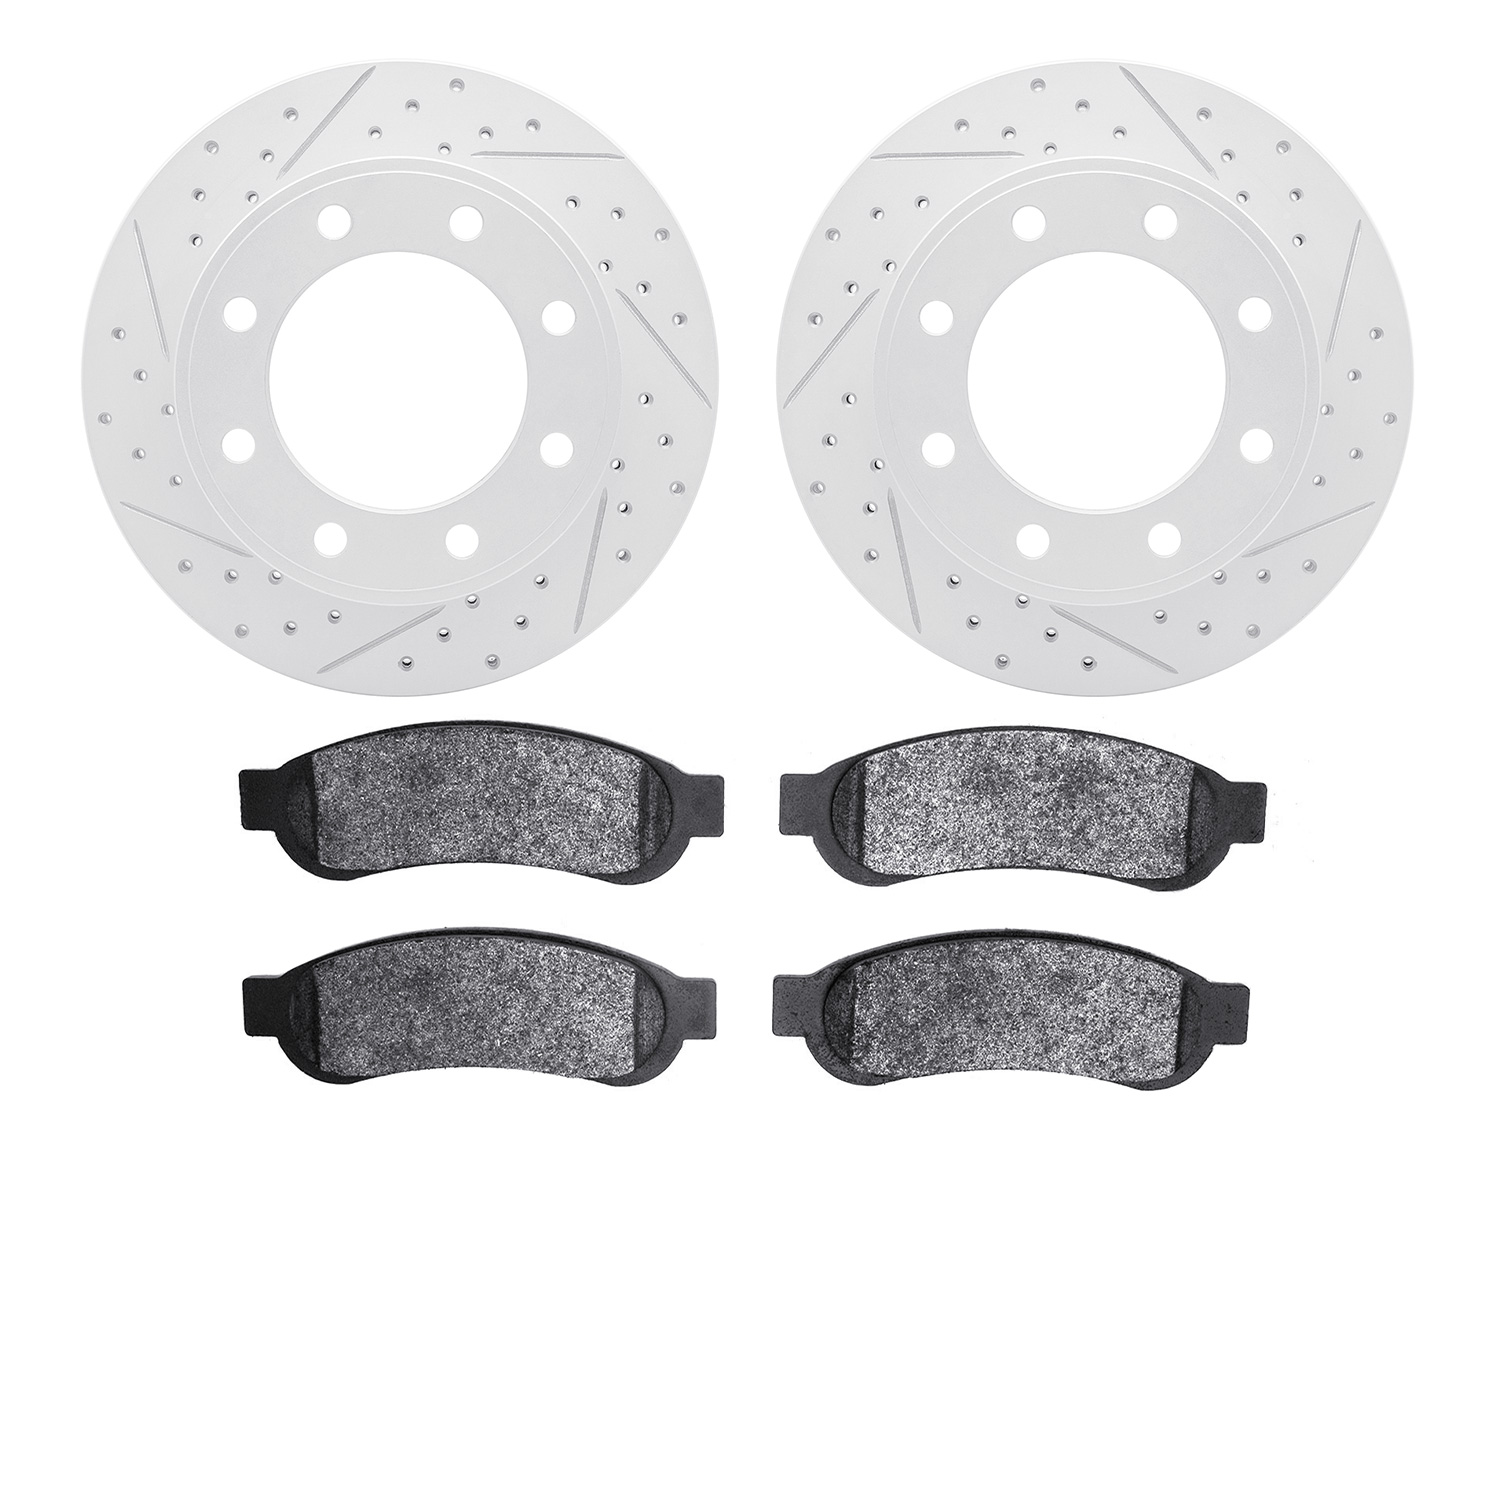 2202-99154 Geoperformance Drilled/Slotted Rotors w/Heavy-Duty Pads Kit, 2010-2012 Ford/Lincoln/Mercury/Mazda, Position: Rear